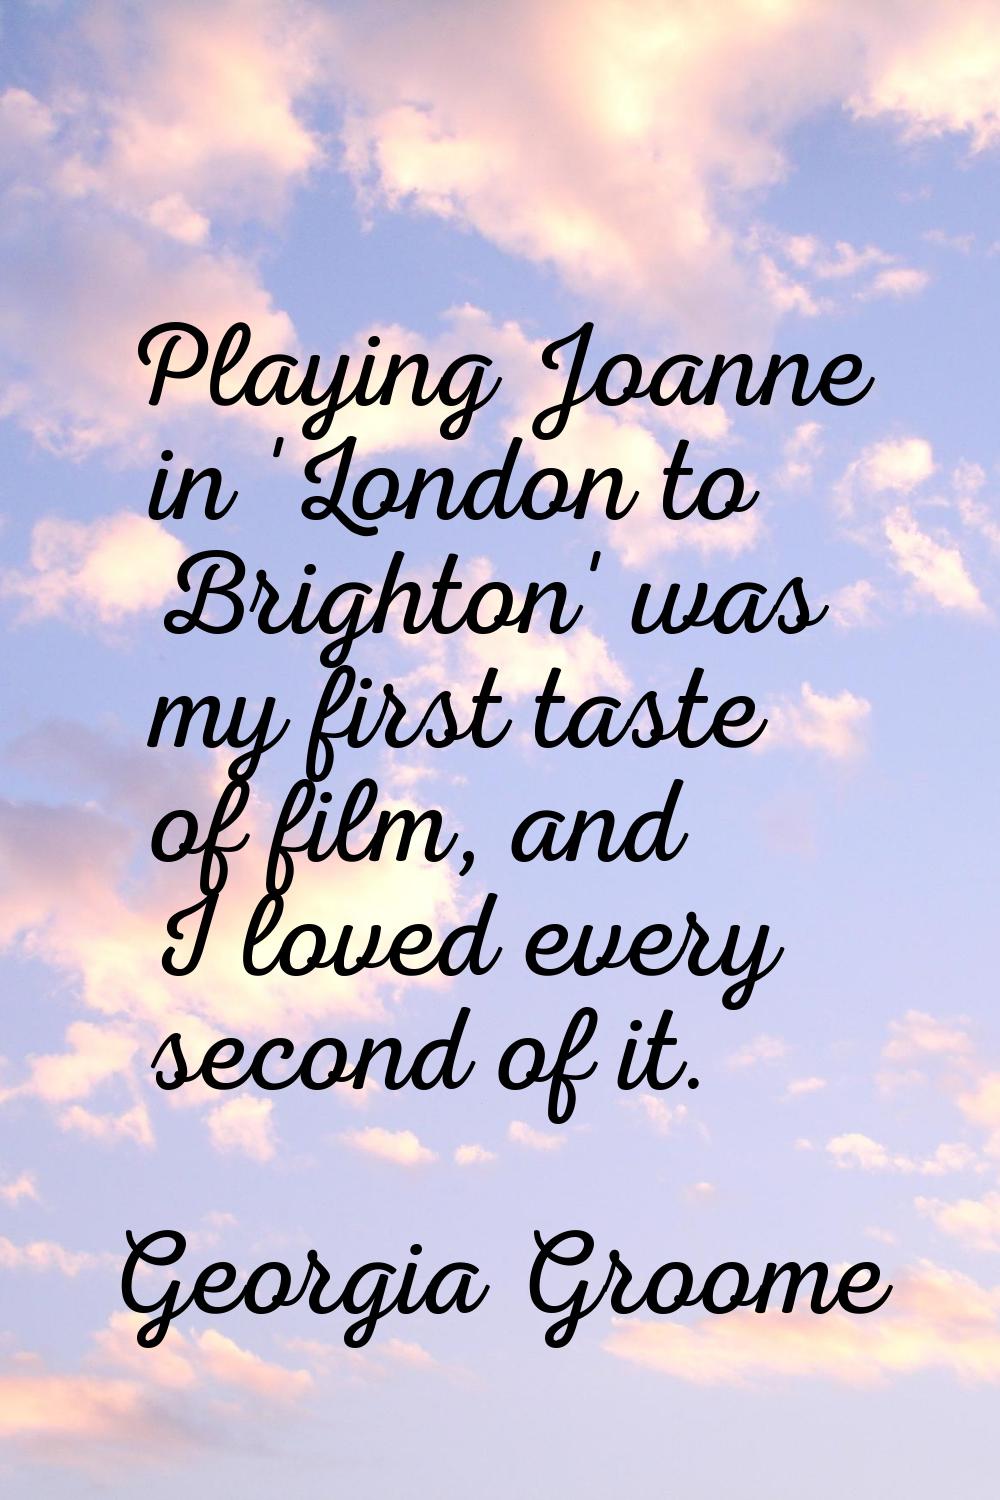 Playing Joanne in 'London to Brighton' was my first taste of film, and I loved every second of it.